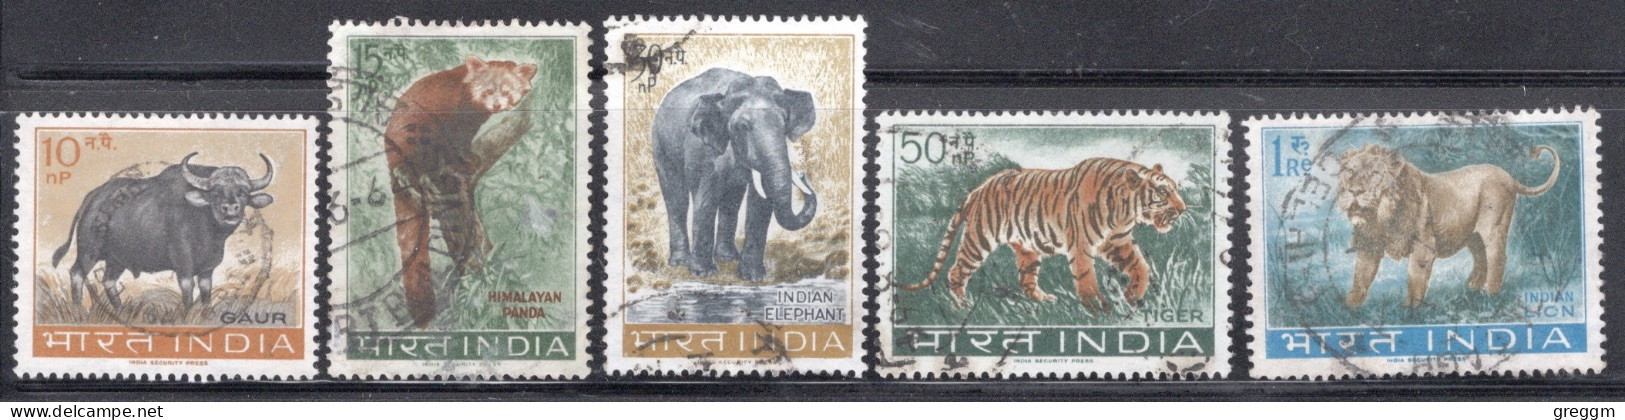 India 1963 Set Of Stamps To Celebrate Wildlife Conservation In Fine Used - Gebruikt